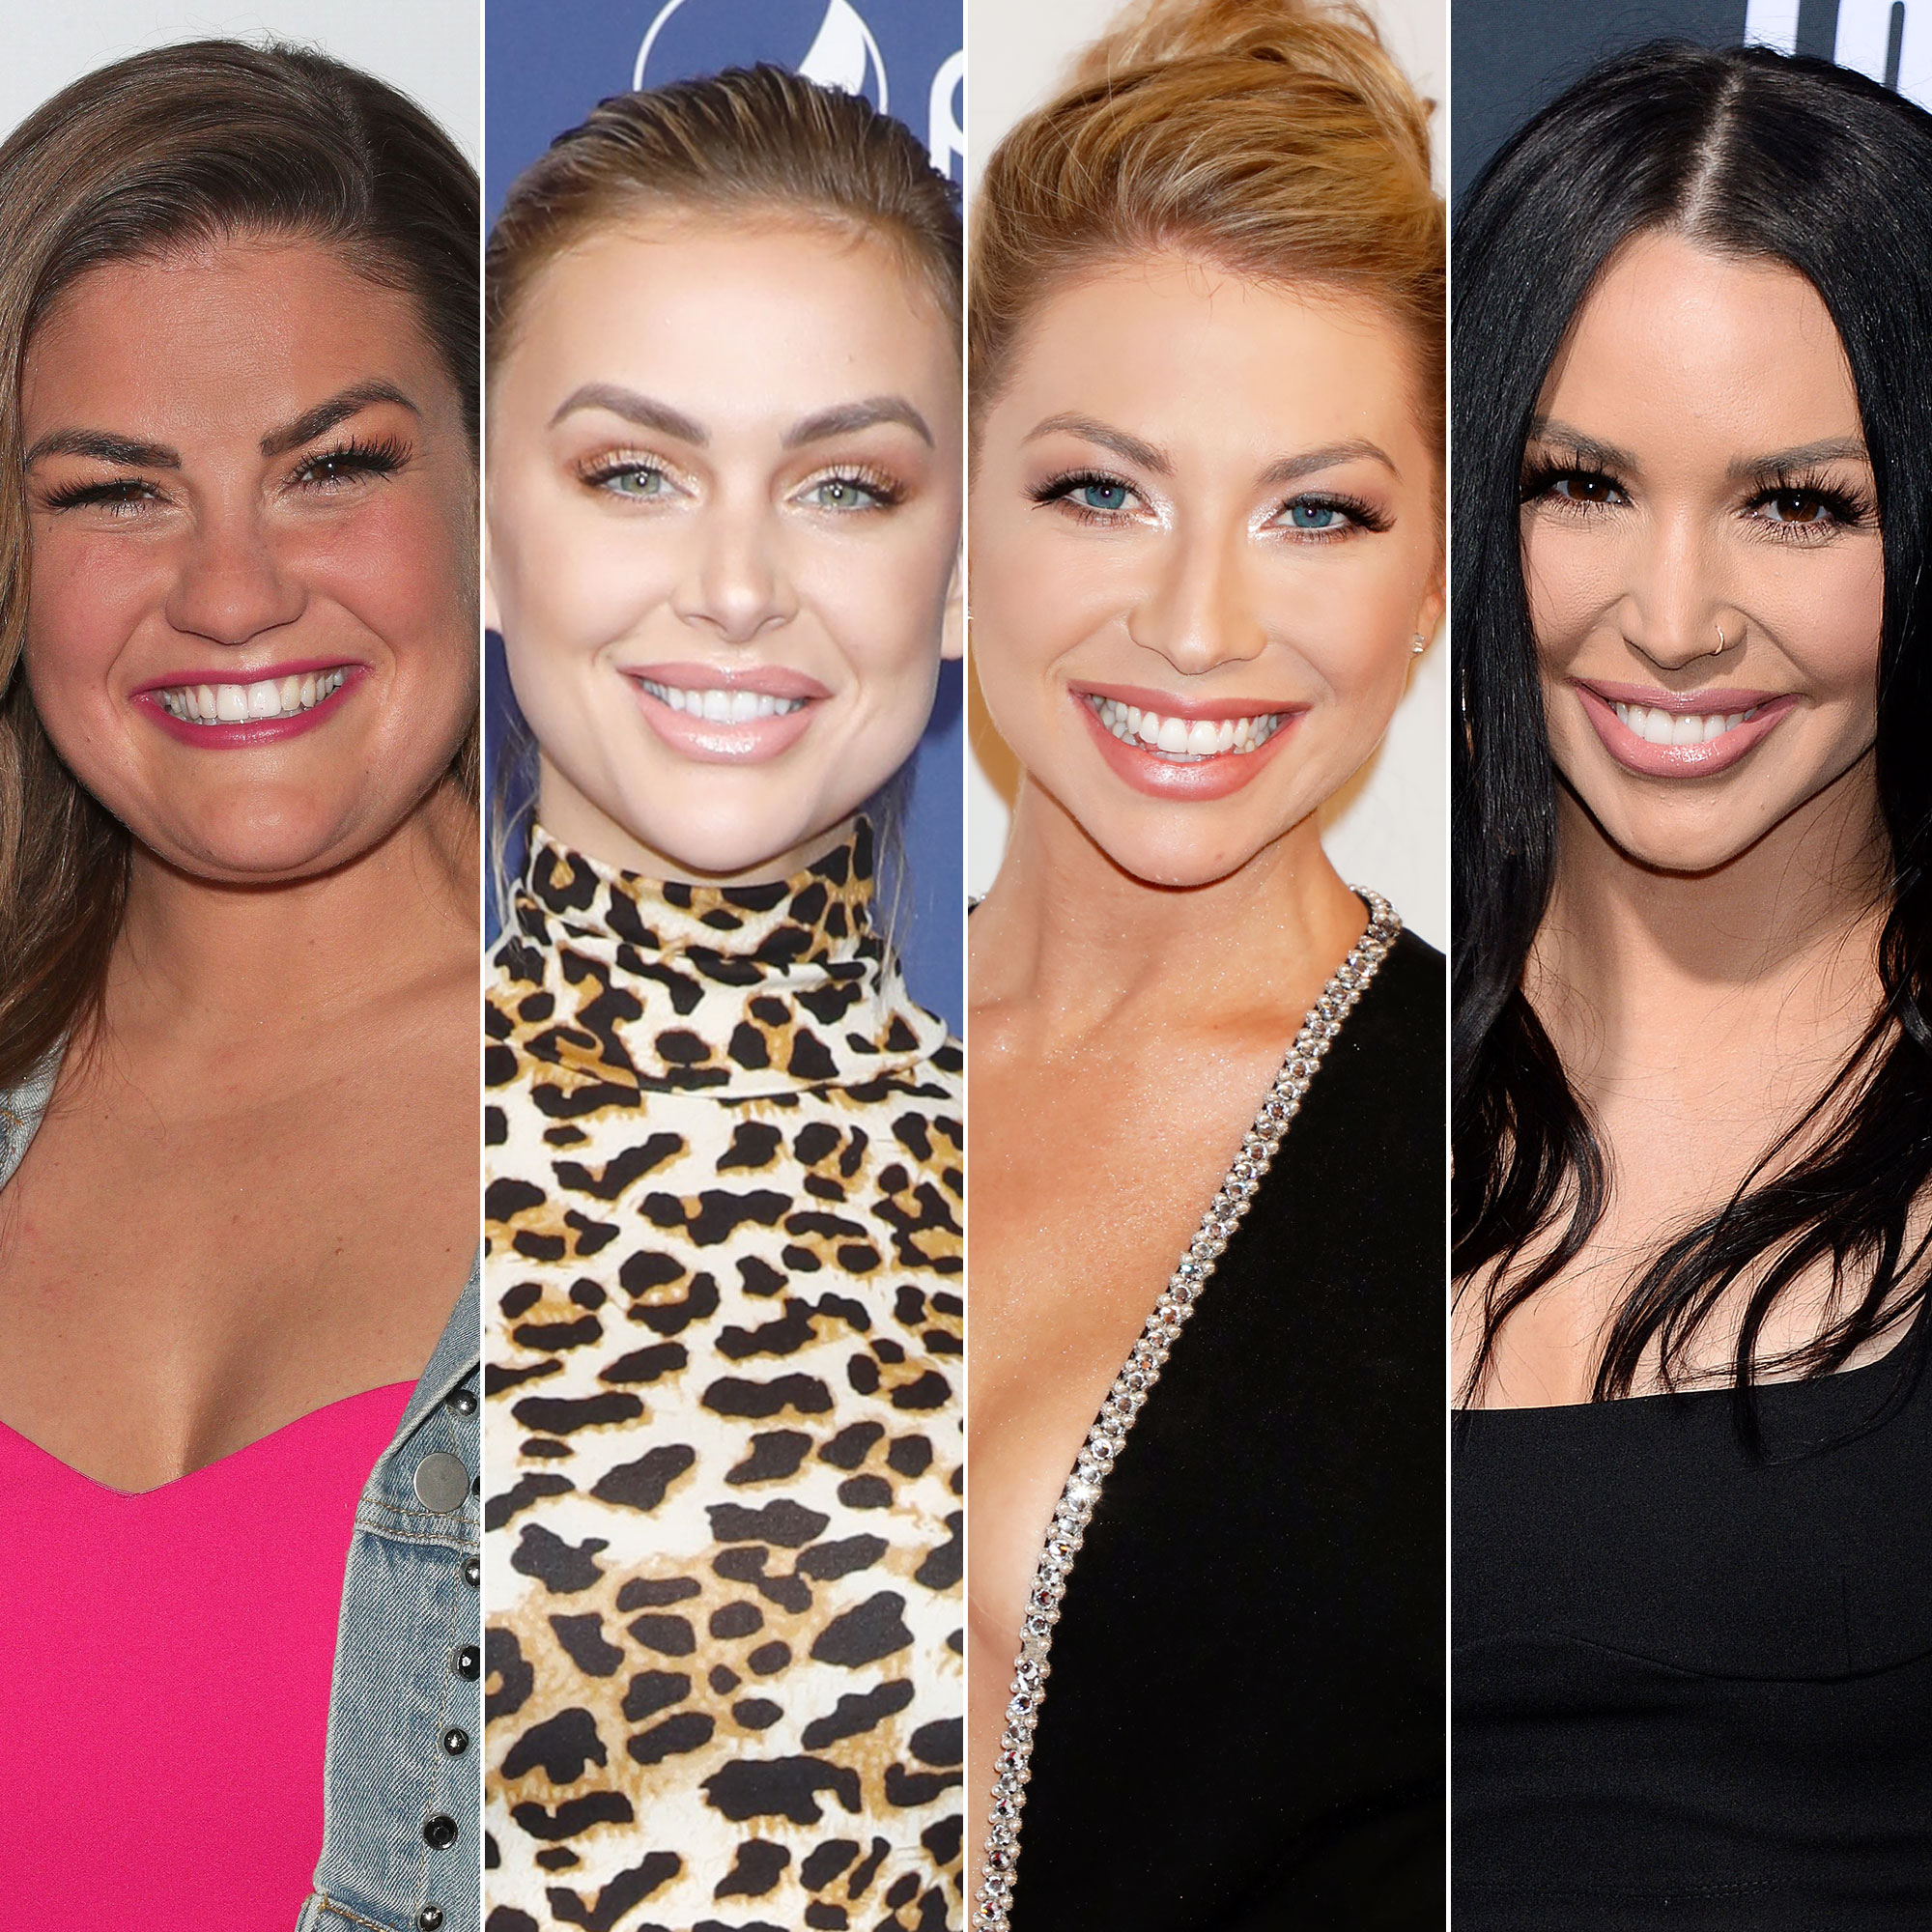 Pump Rules' Brittany, Lala, Stassi, Scheana Talk Mom Life Daily